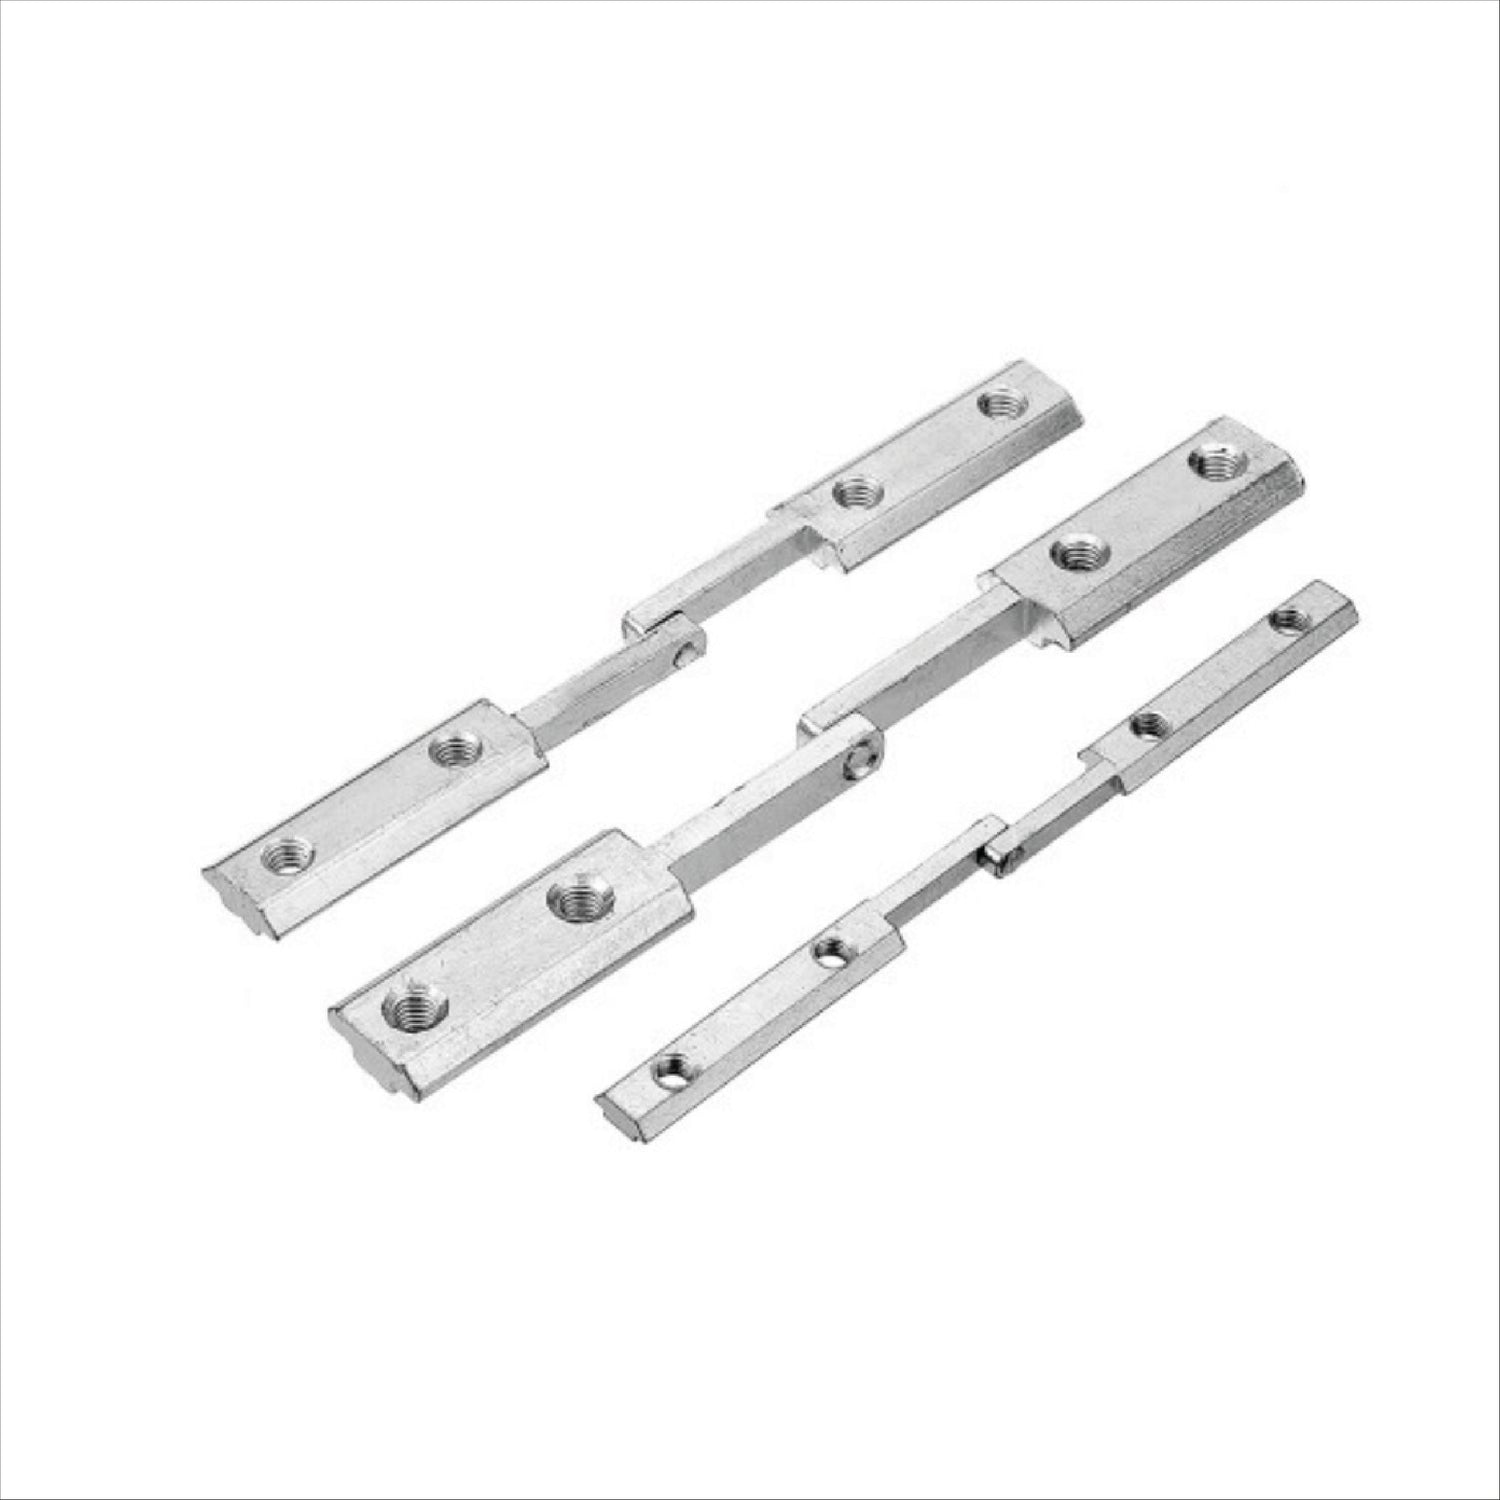 Simple Any Angle Connector  20 series type A